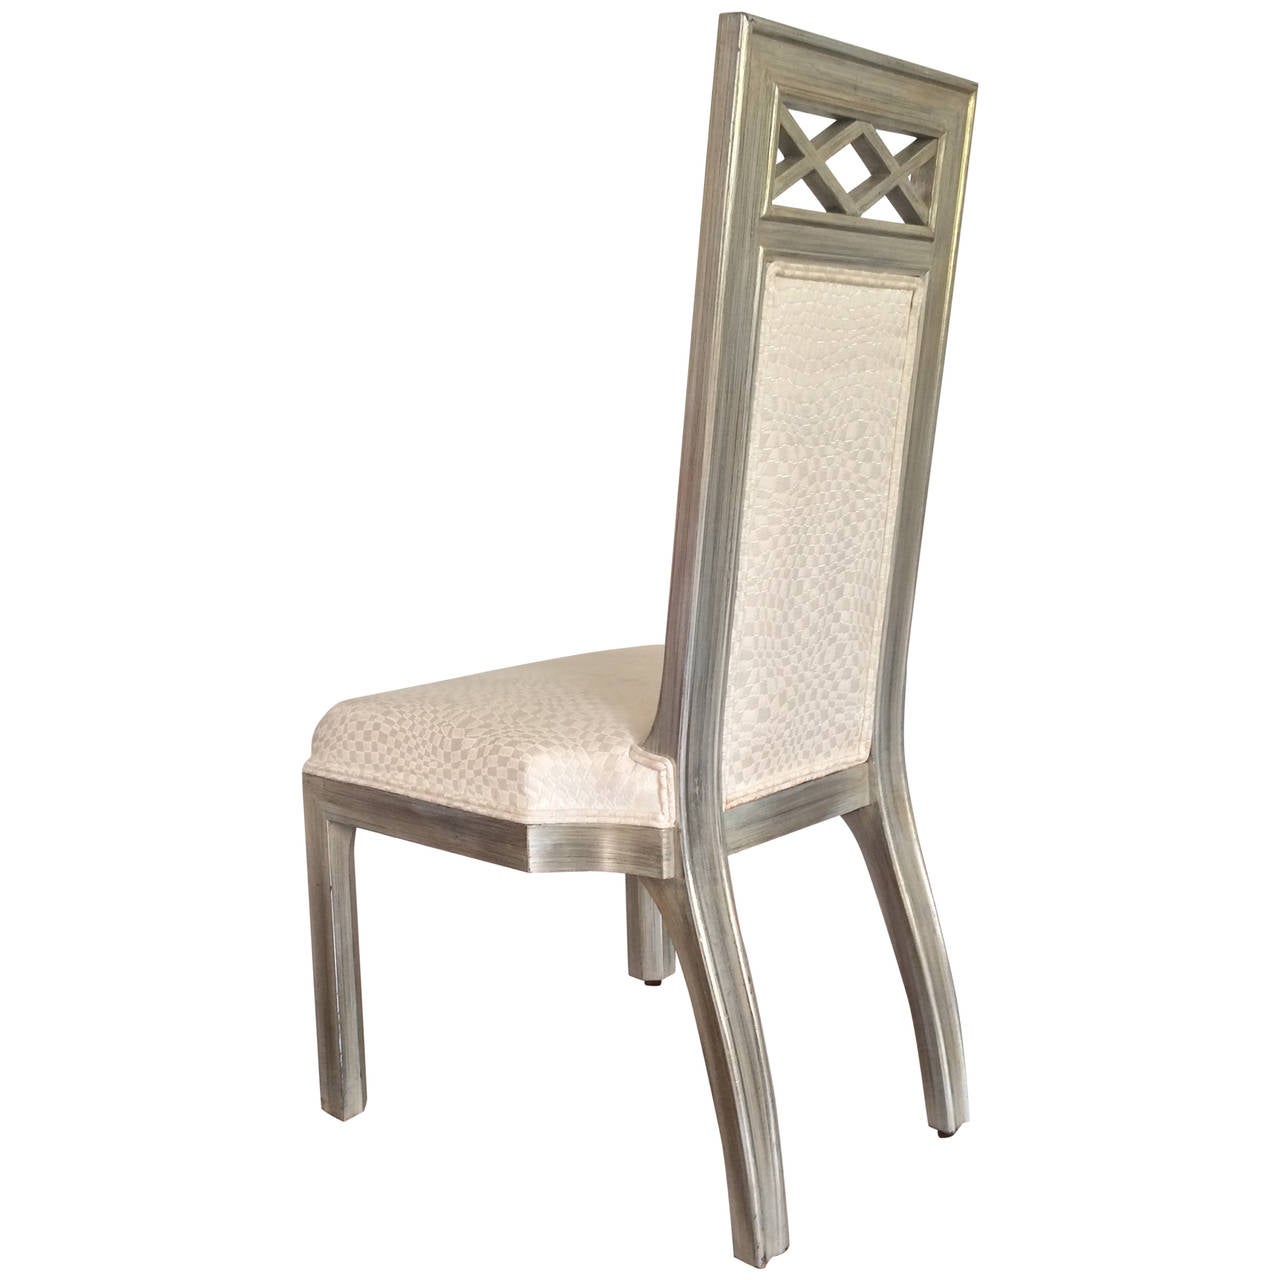 A James Mont wood and silver leaf occasional chair. 

Dimensions: 40" H x (18" seat height) x 19" W x 22" D.